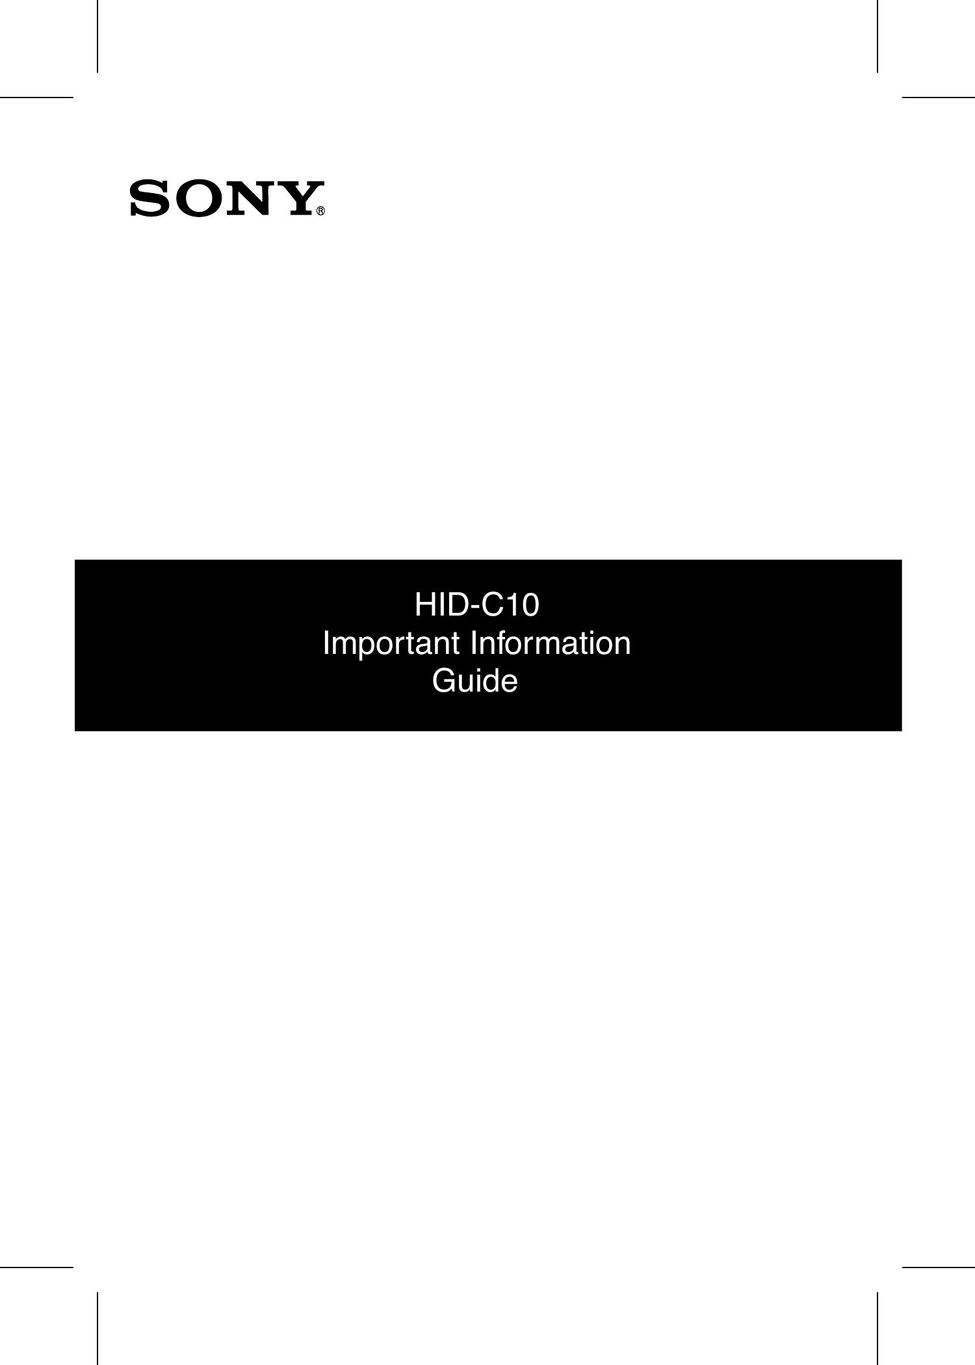 Sony HID-C10 Personal Computer User Manual